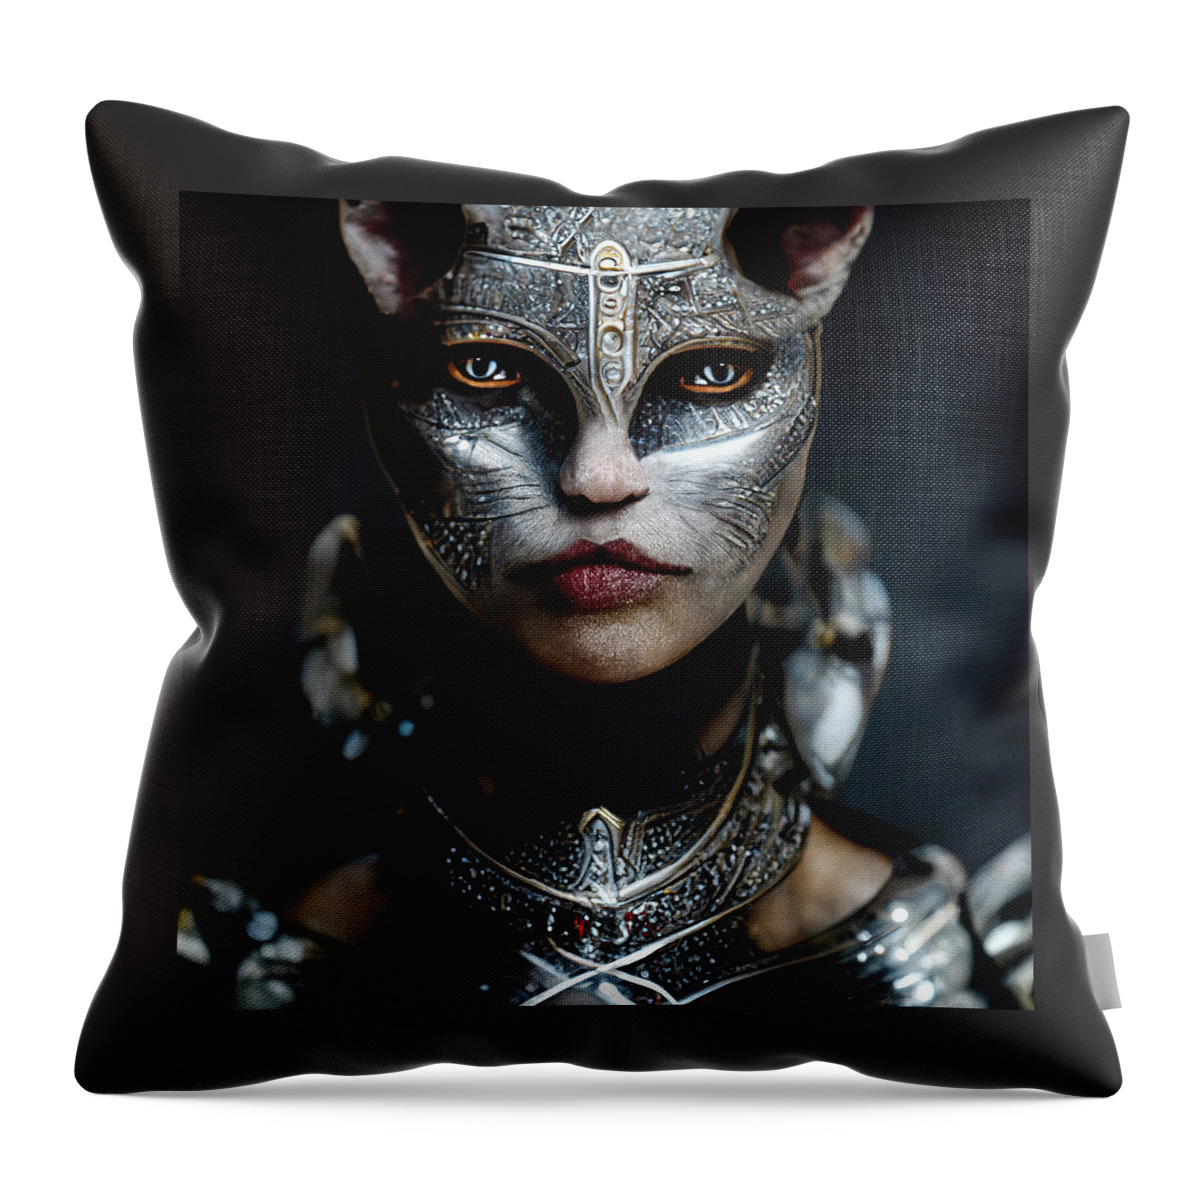 Warriors Throw Pillow featuring the digital art Cat Woman Warrior Portrait by Peggy Collins